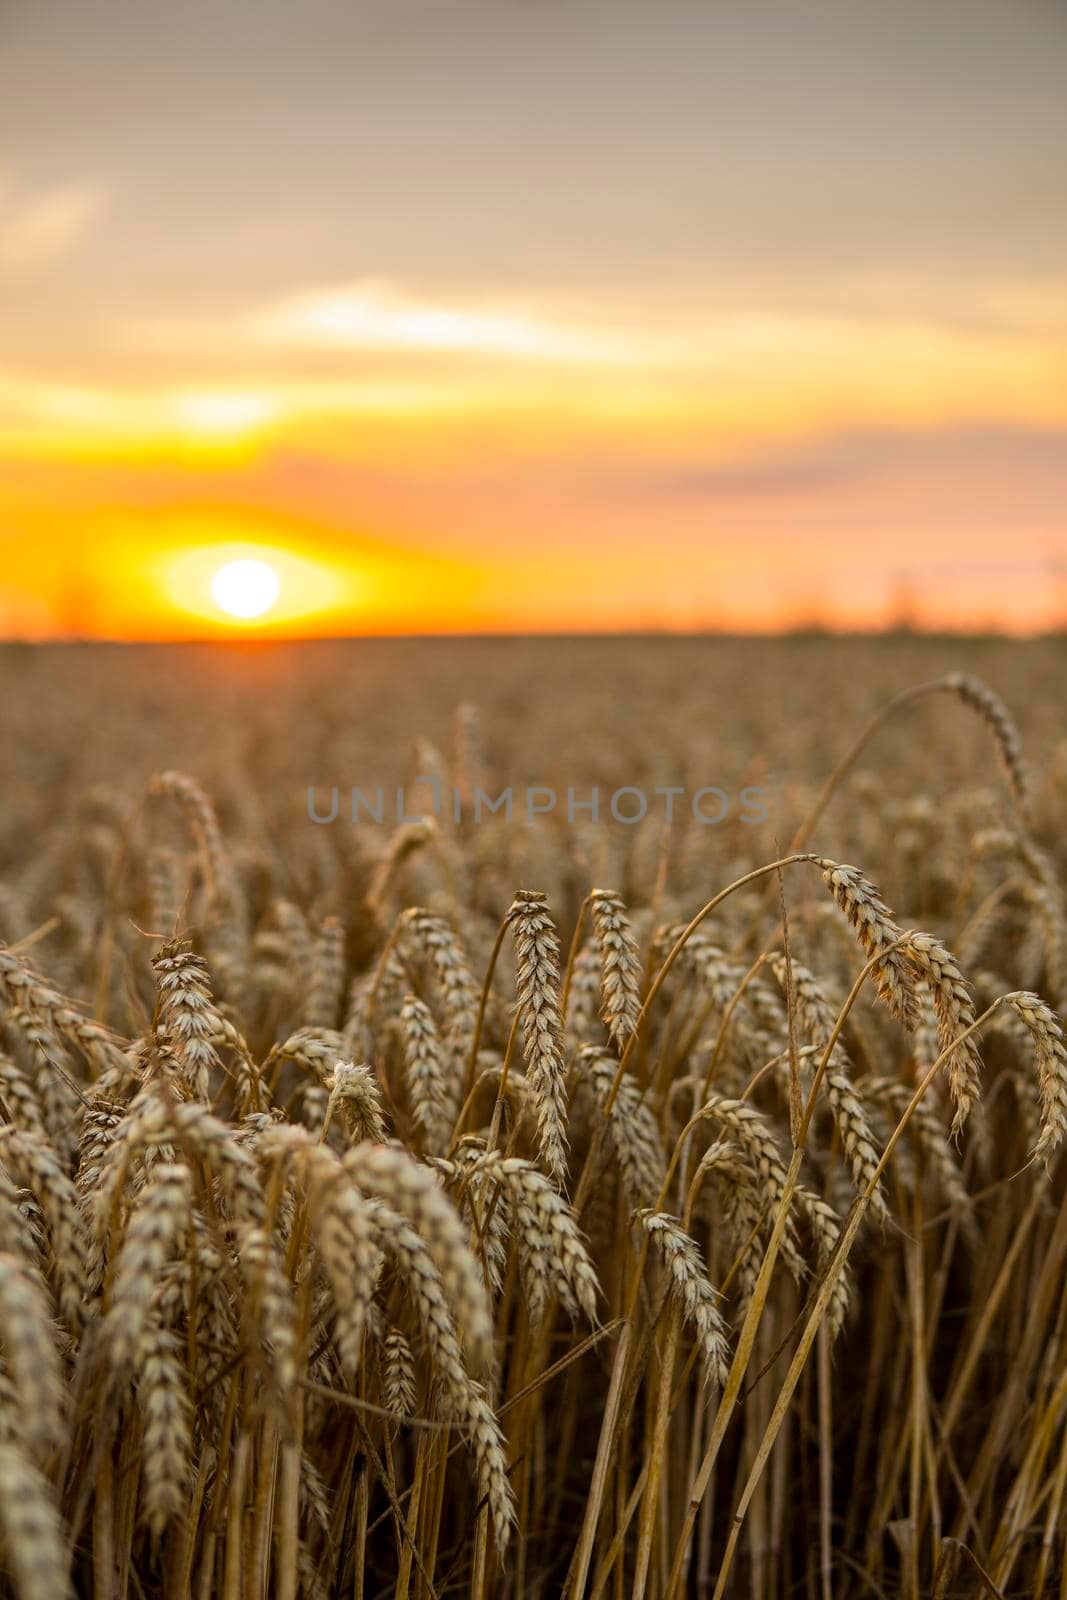 Majestic sunset over a wheat field. Wheat ears under sunshine at sunset. Wonderful rural landscape